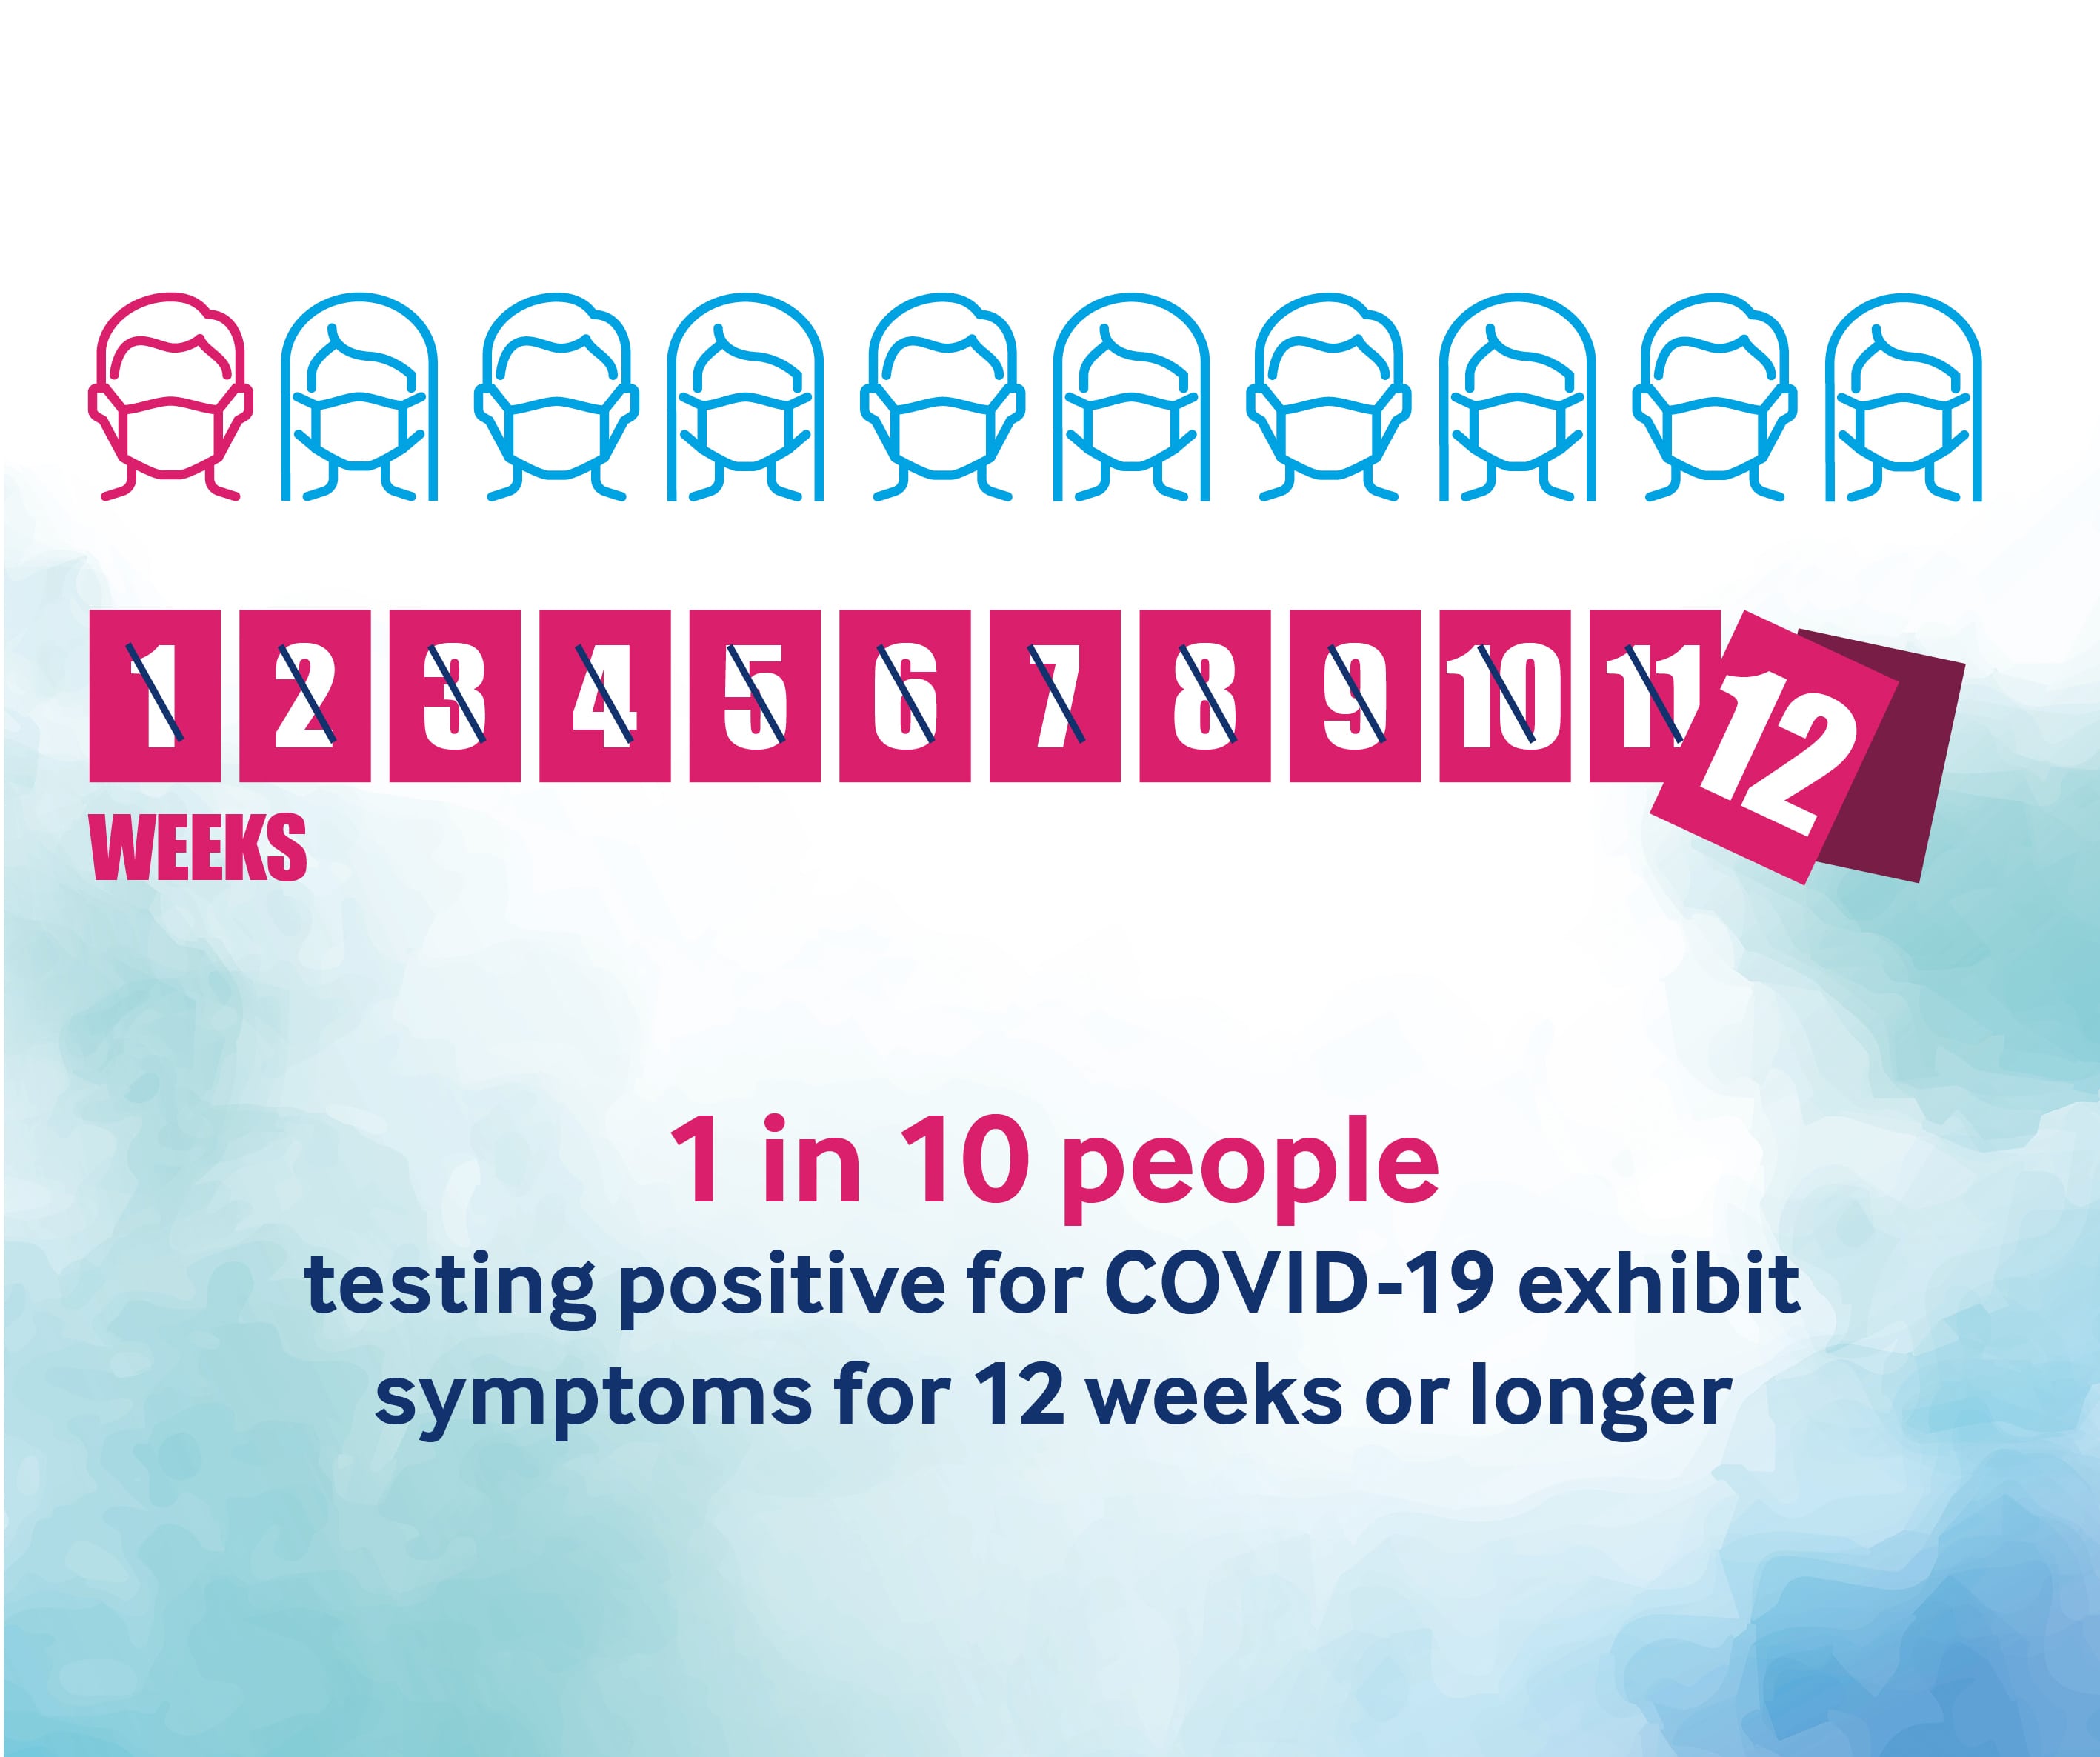 1 in 10 people covid positive have symptoms for 12+ weeks